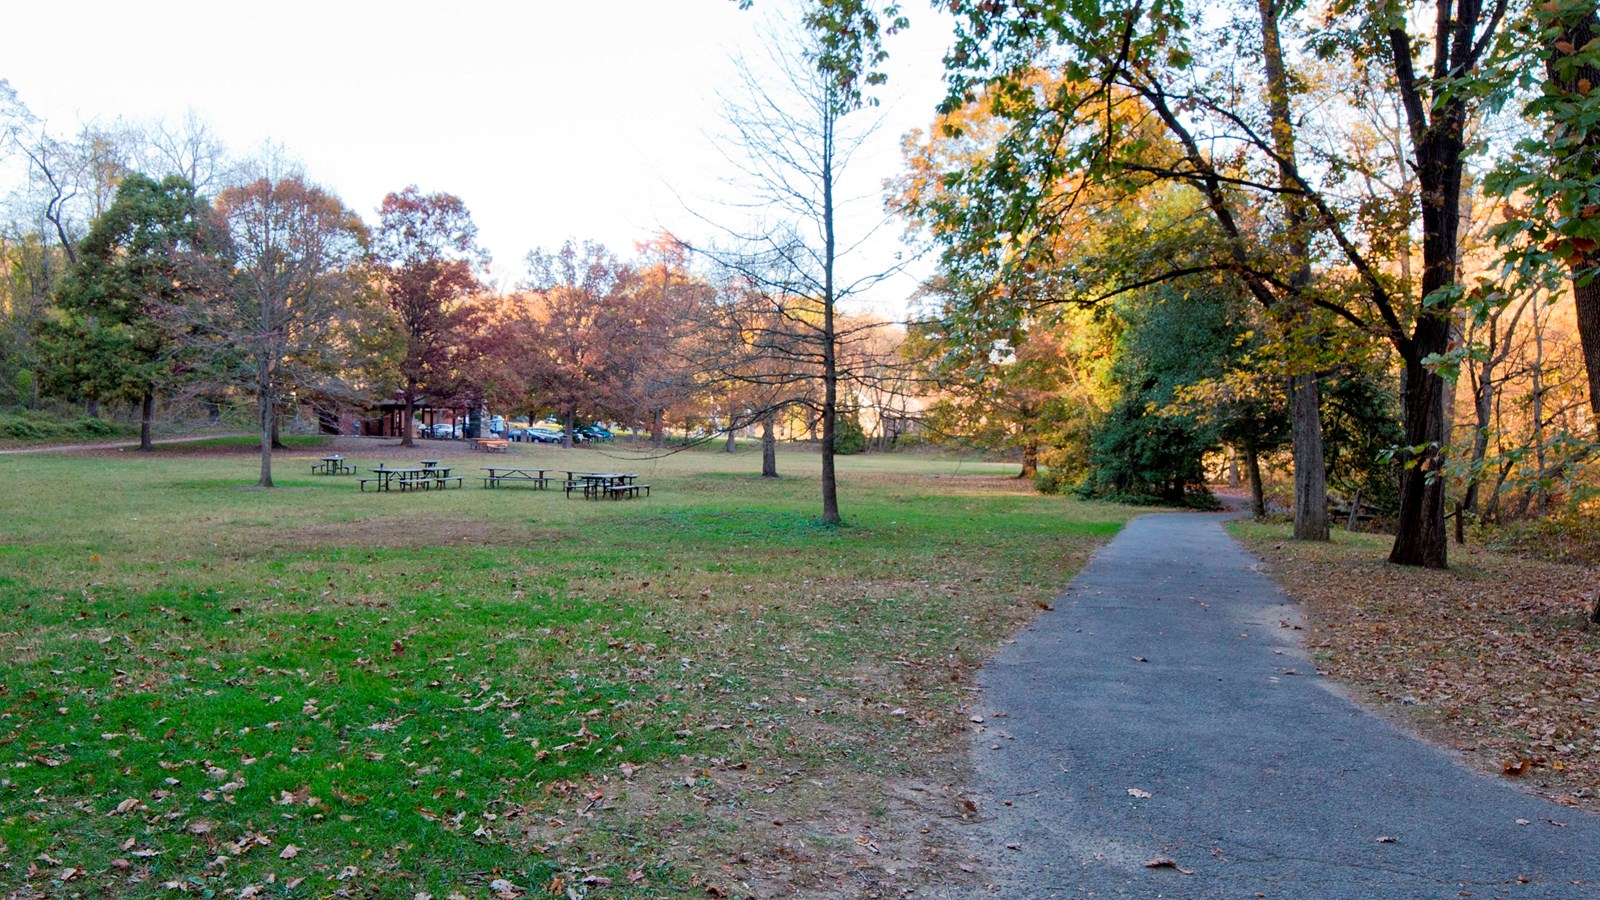 A grassy area with pavilion, picnic tables and several trails. It is shadowed by tall trees.